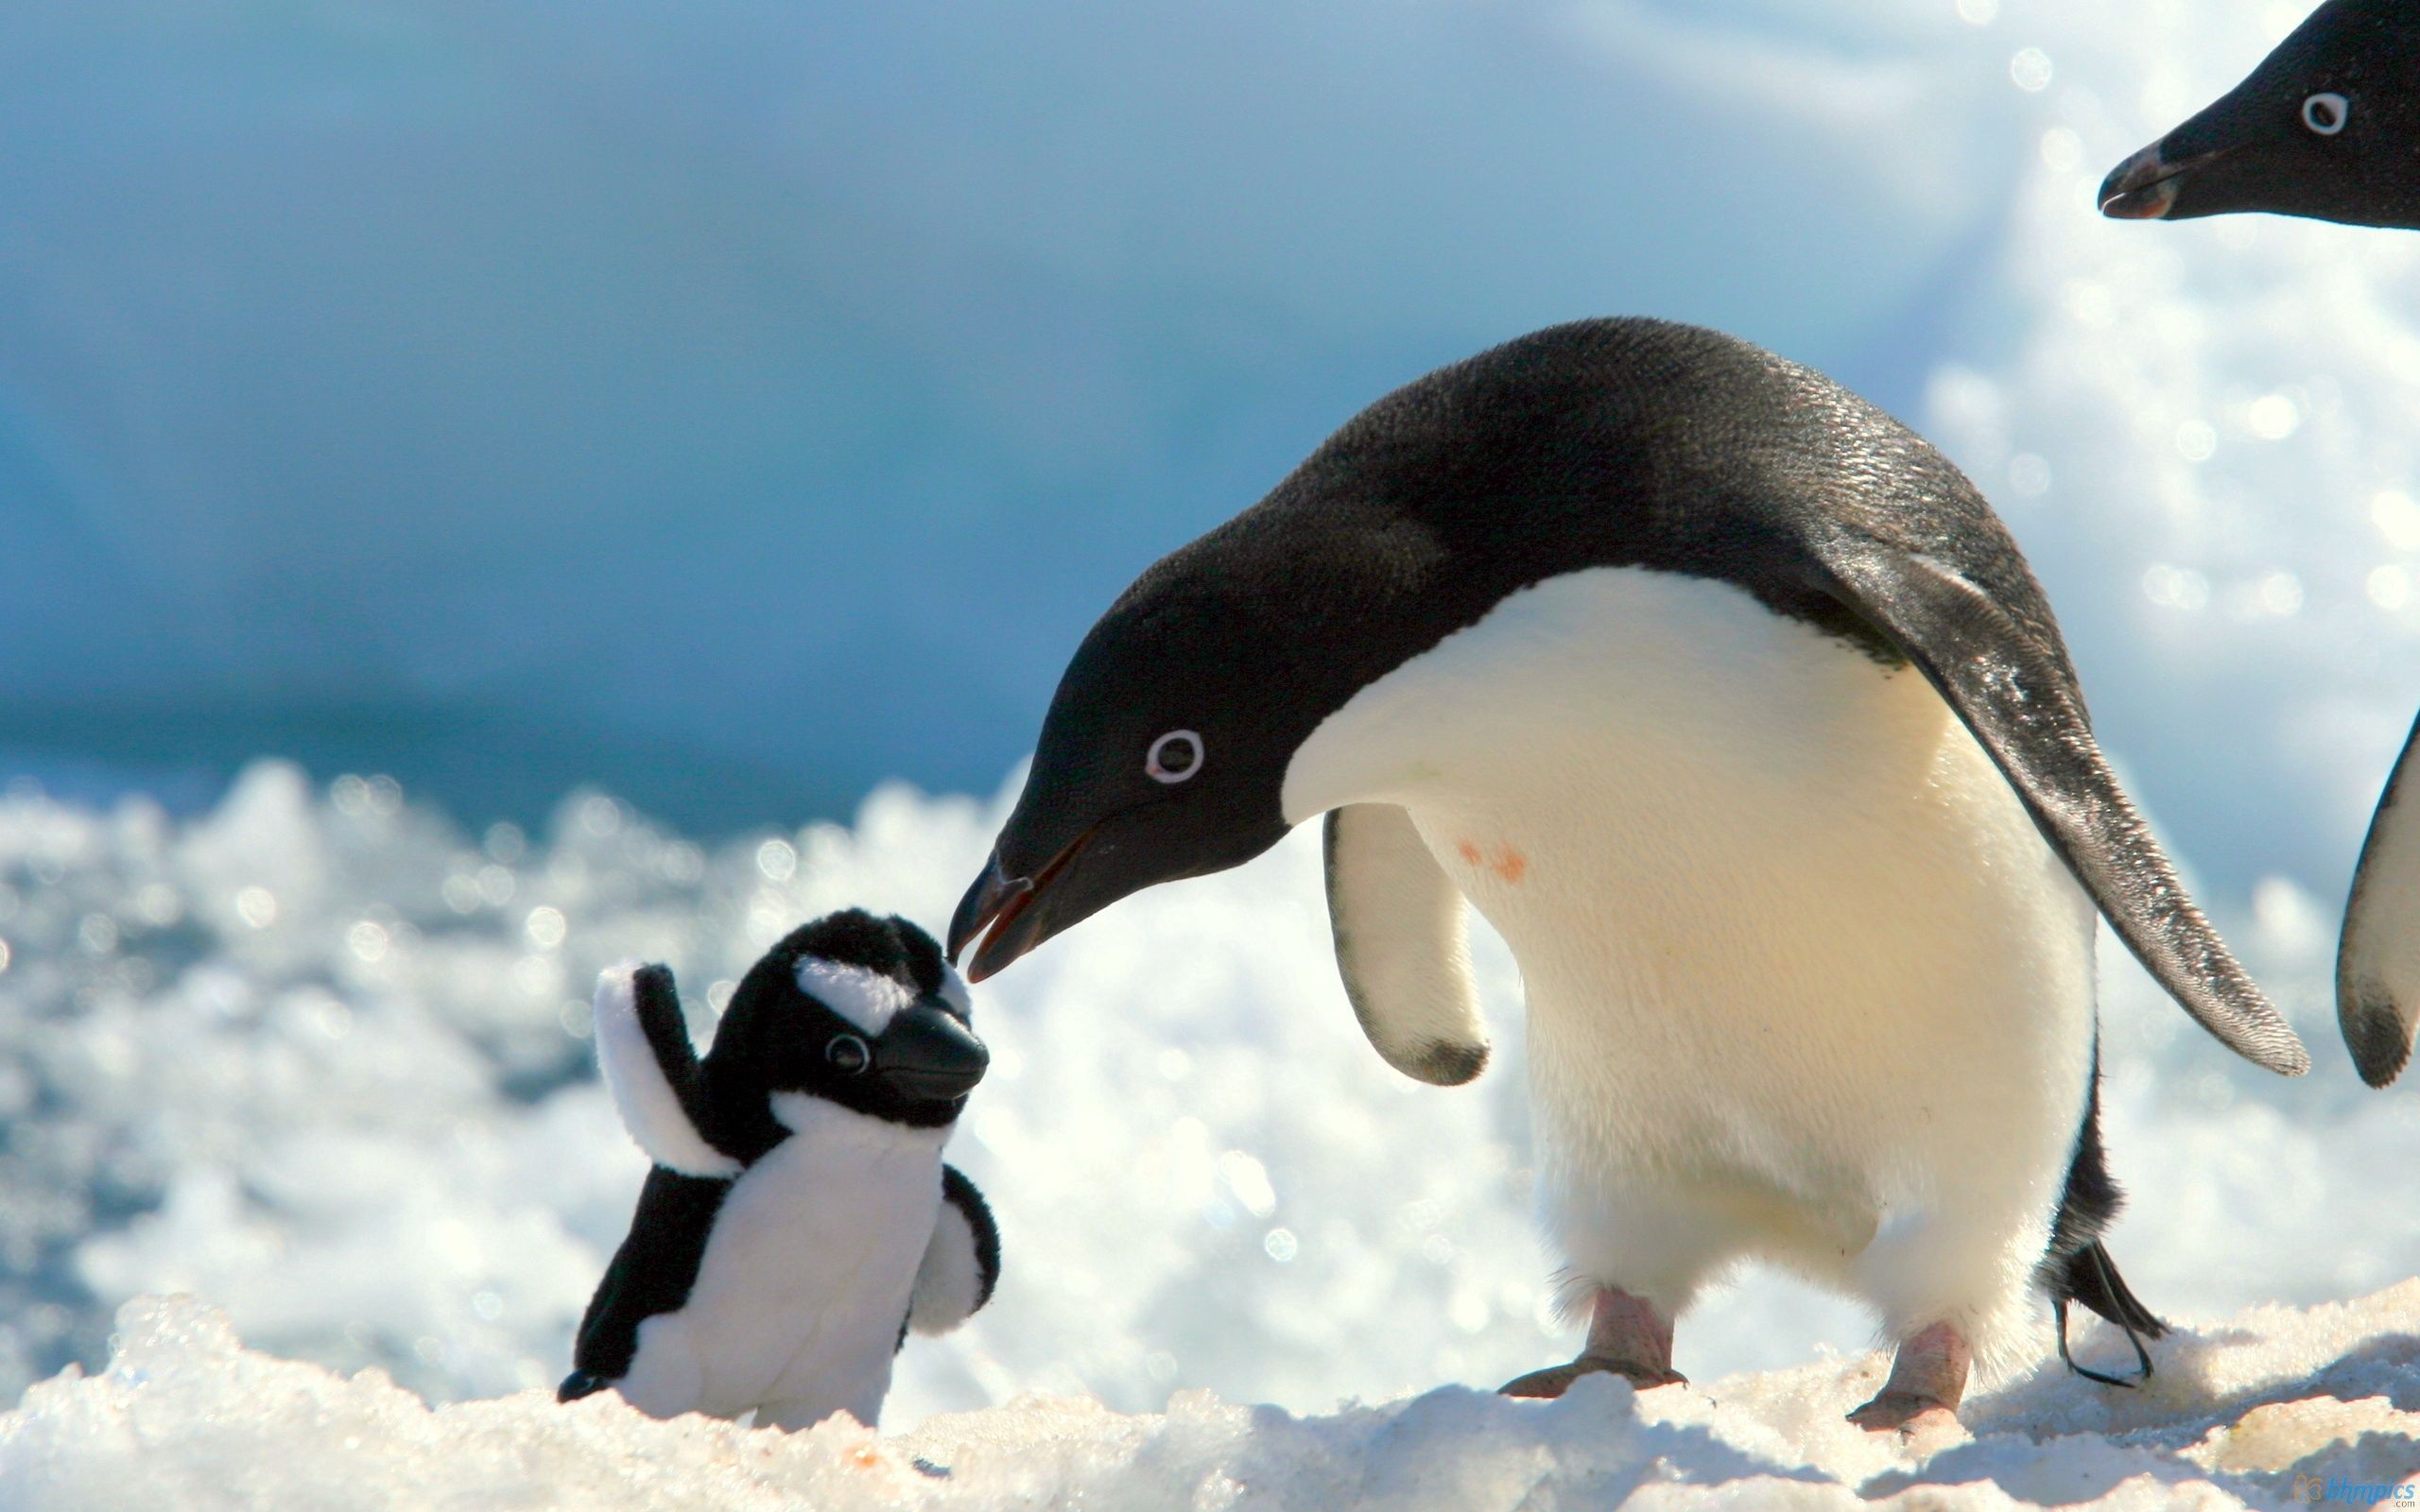 care, animals, pinguins, snow, young, joey download HD wallpaper